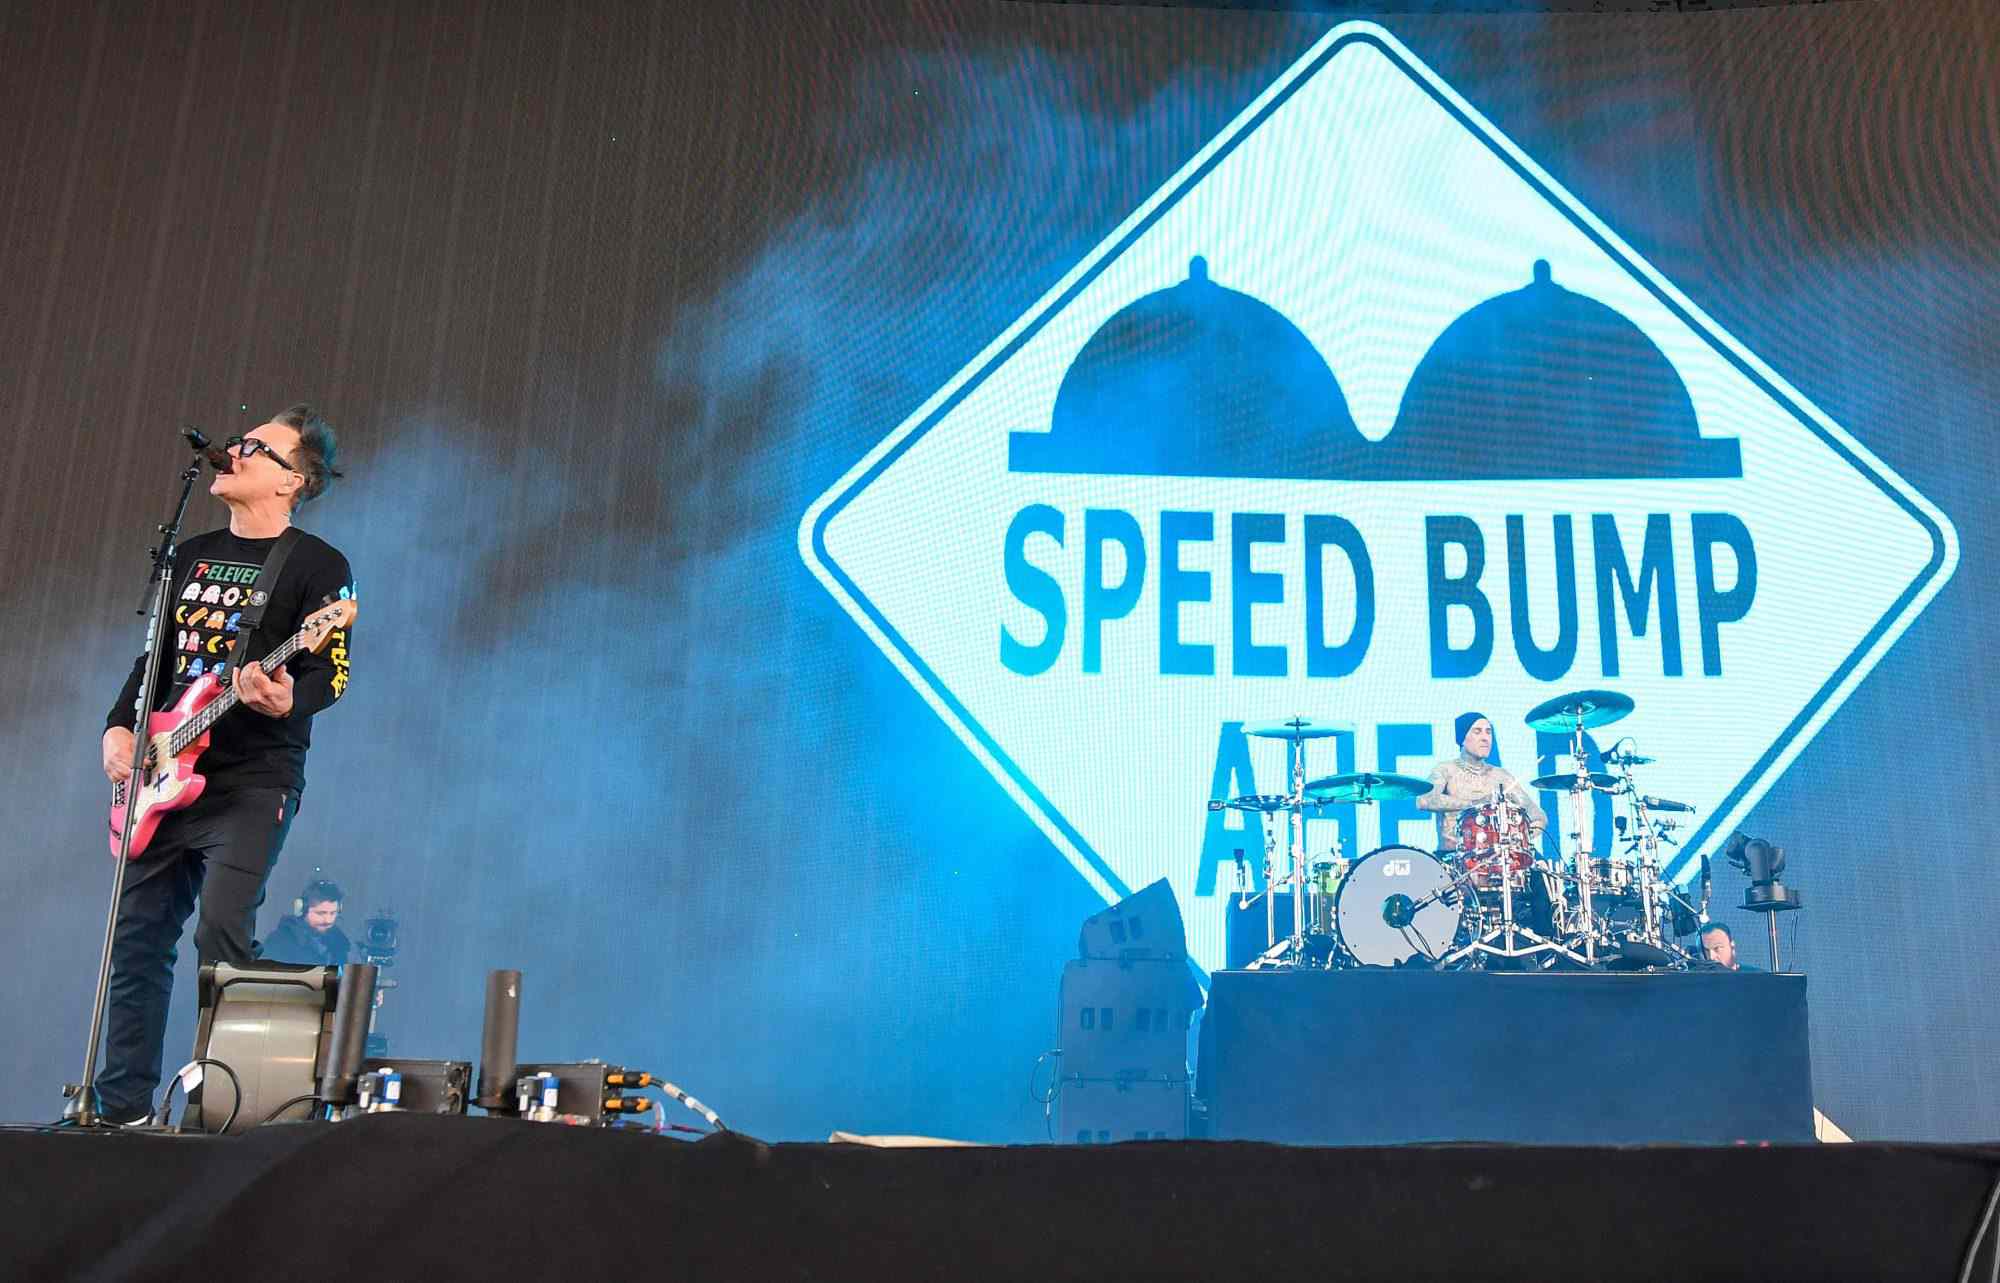 Blink-182 band members Mark Hoppus (L) and Travis Barker (R) perform during the first week-end of Coachella Valley Music and Arts Festival in Indio, California, on April 14, 2023. (Photo by VALERIE MACON / AFP) (Photo by VALERIE MACON/AFP via Getty Images)